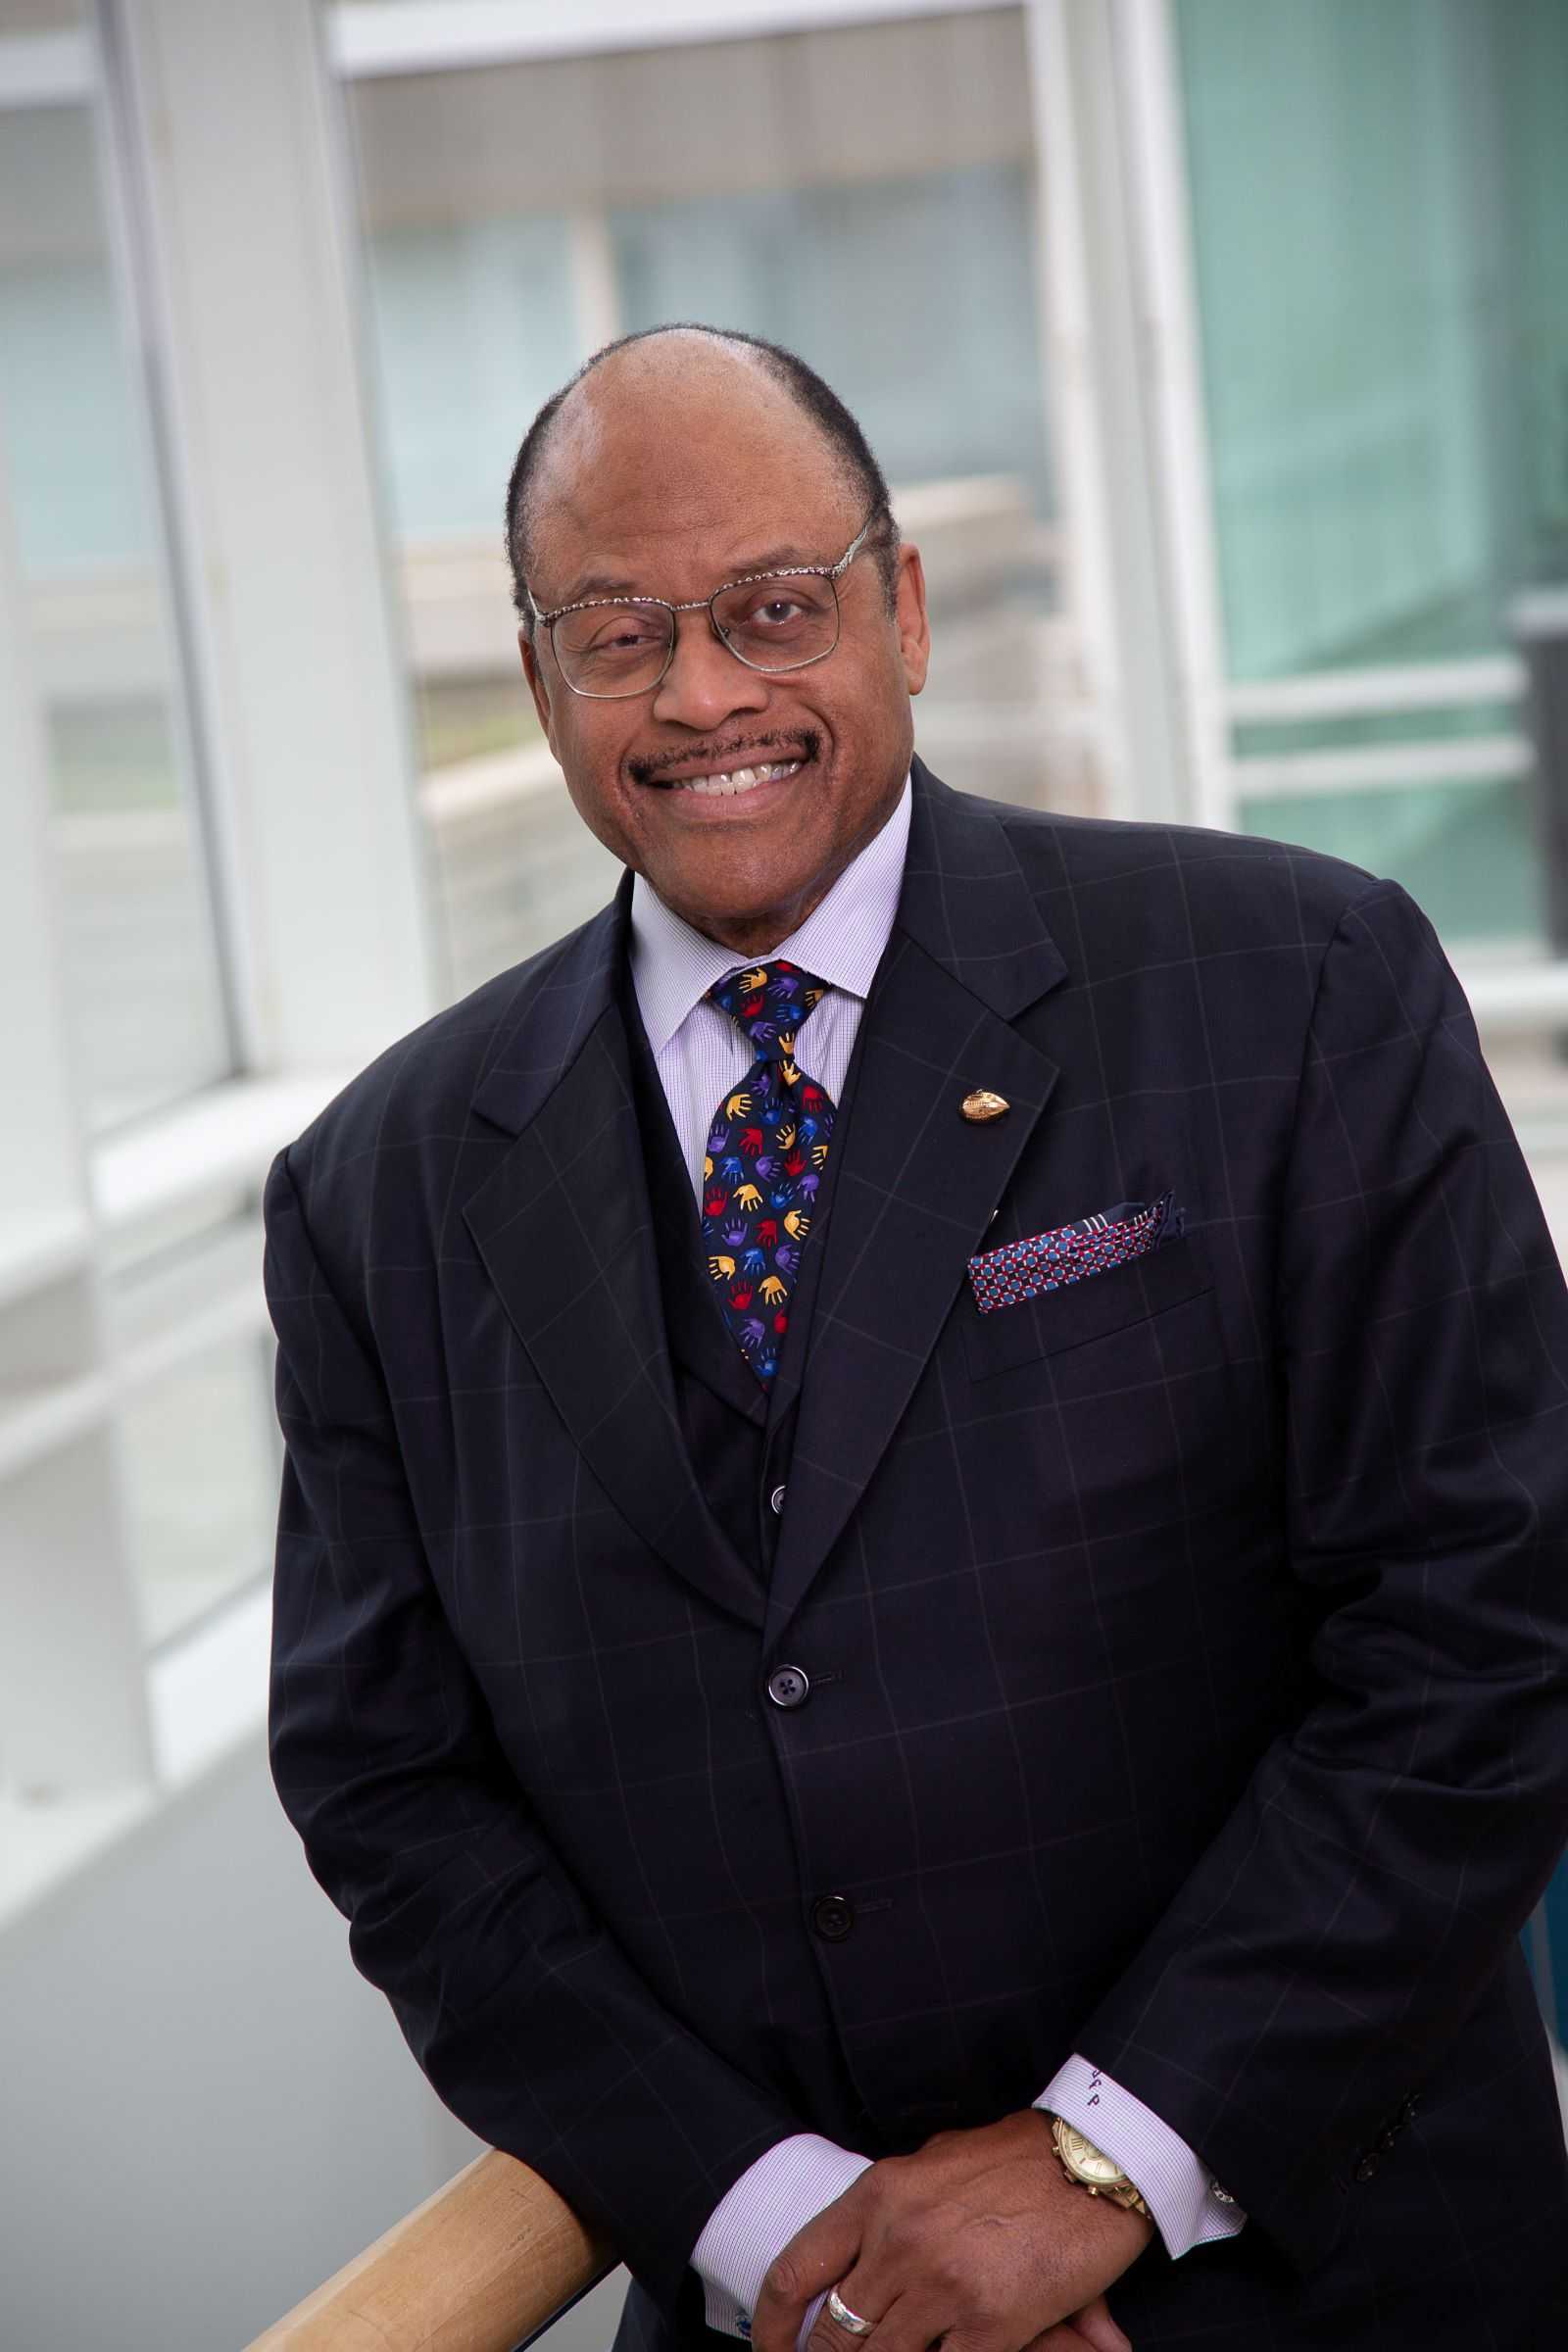 Joseph Patterson Jr. smiles in a 2019 portrait taken on campus during Reunion weekend.